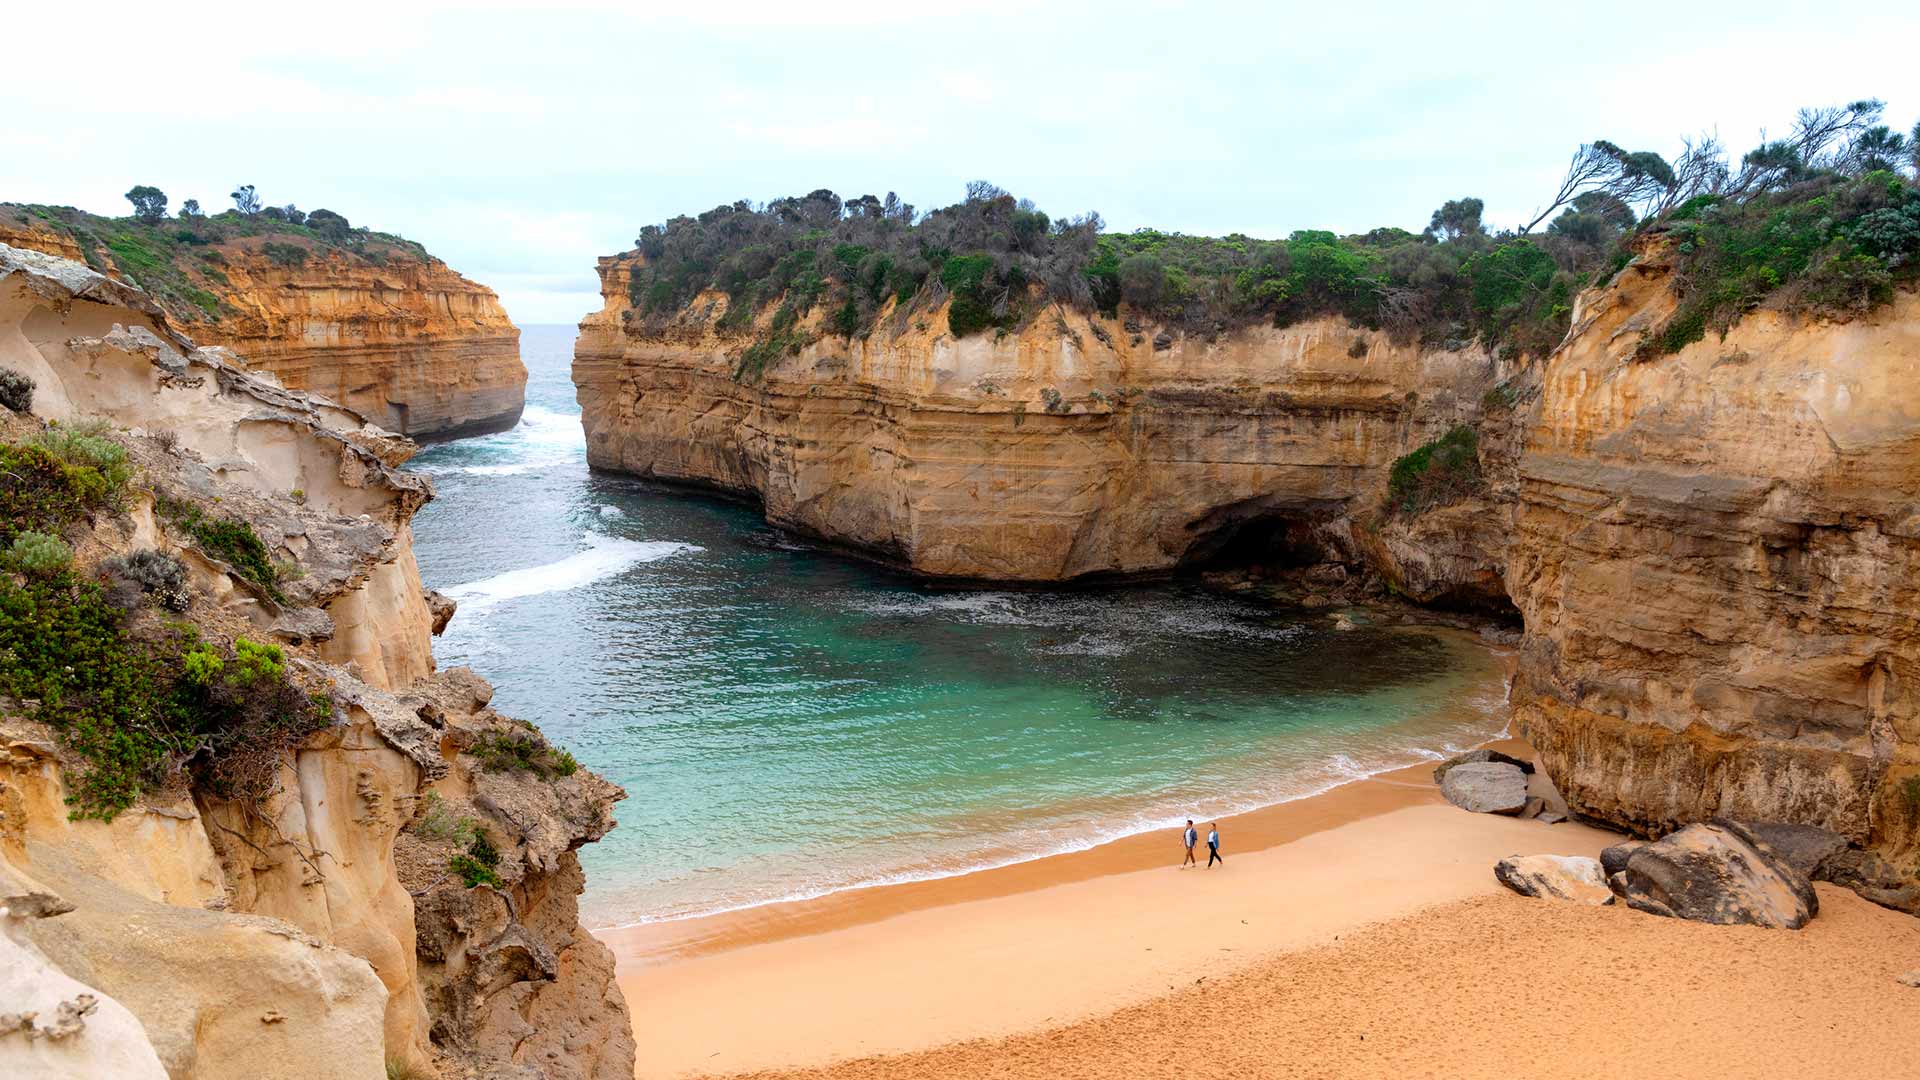 Seven Lesser-Known Stops to Make on a Road Trip Down the Great Ocean Road